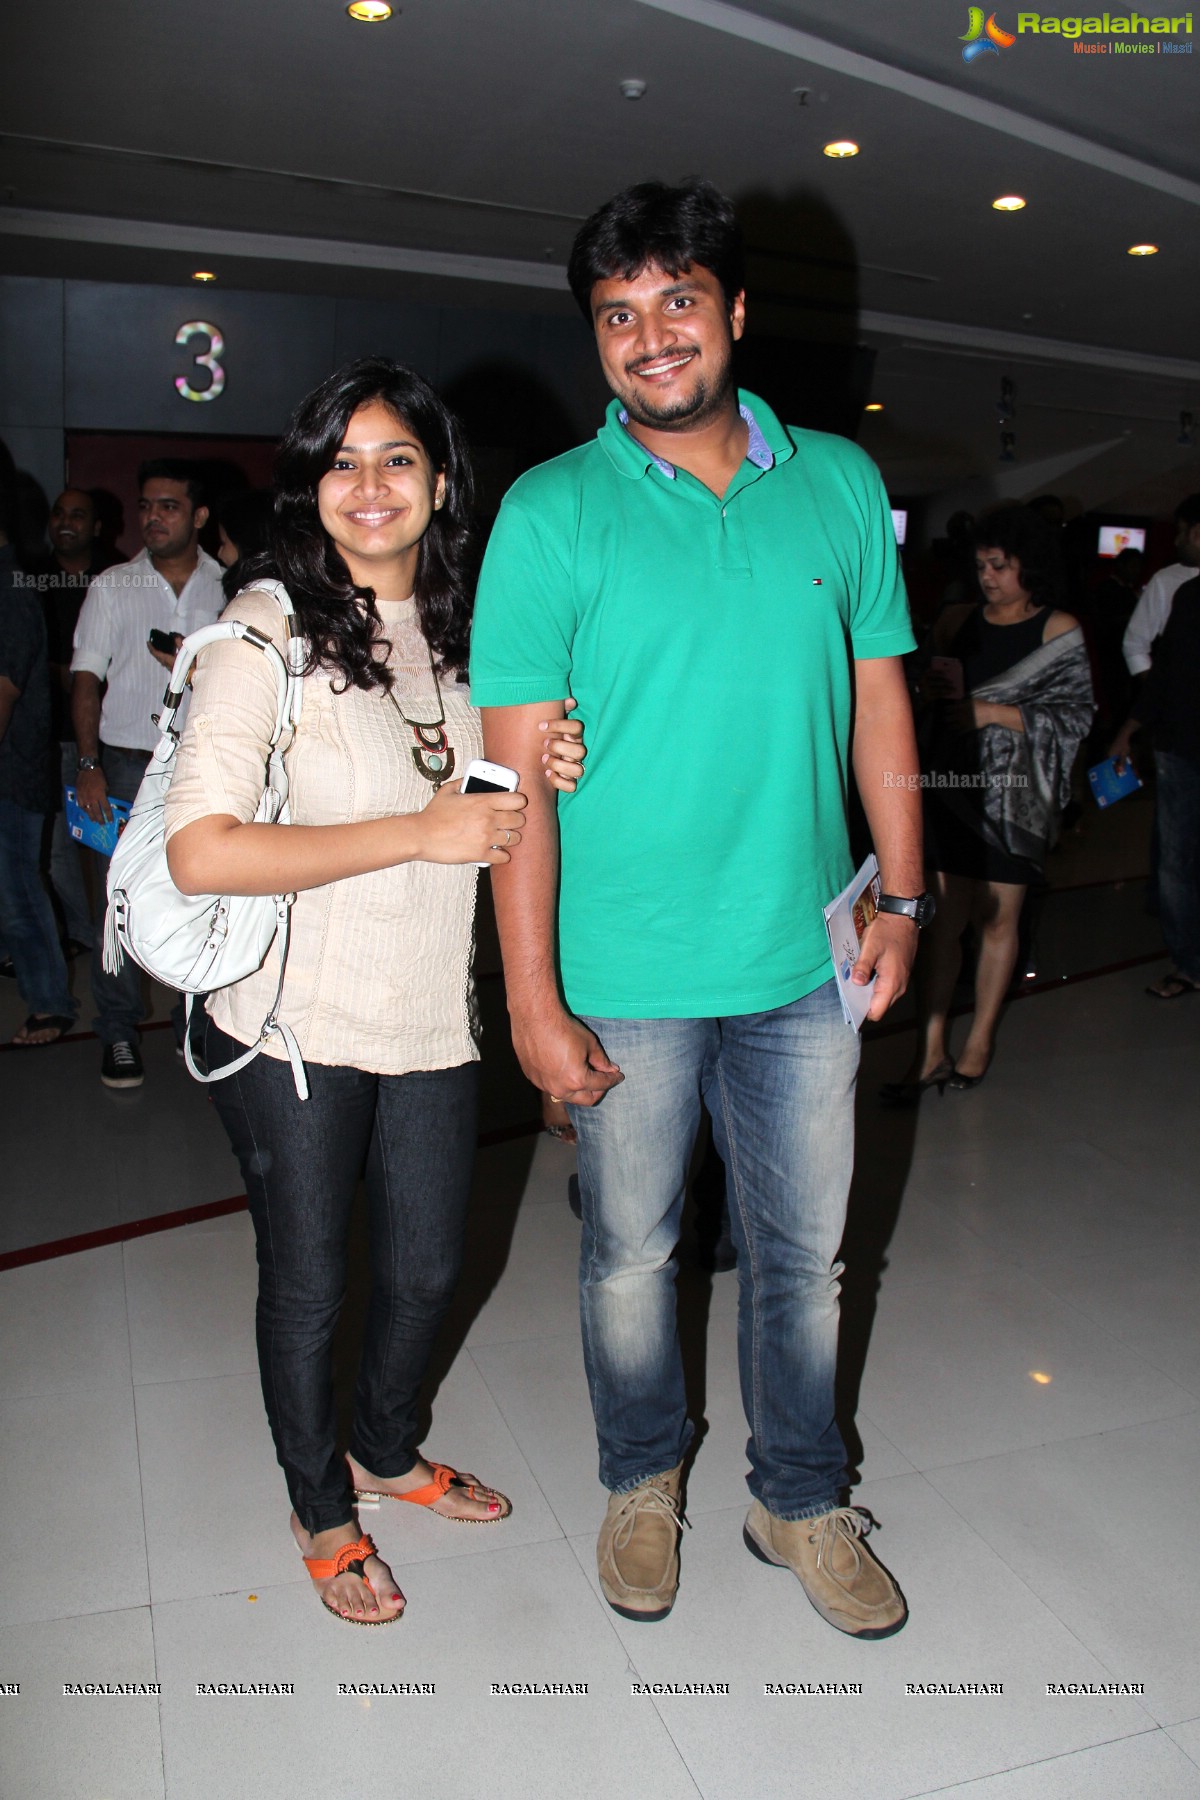 Bhaag Milkha Bhaag Special Screening by Bisket Entertainments and The Blue Door